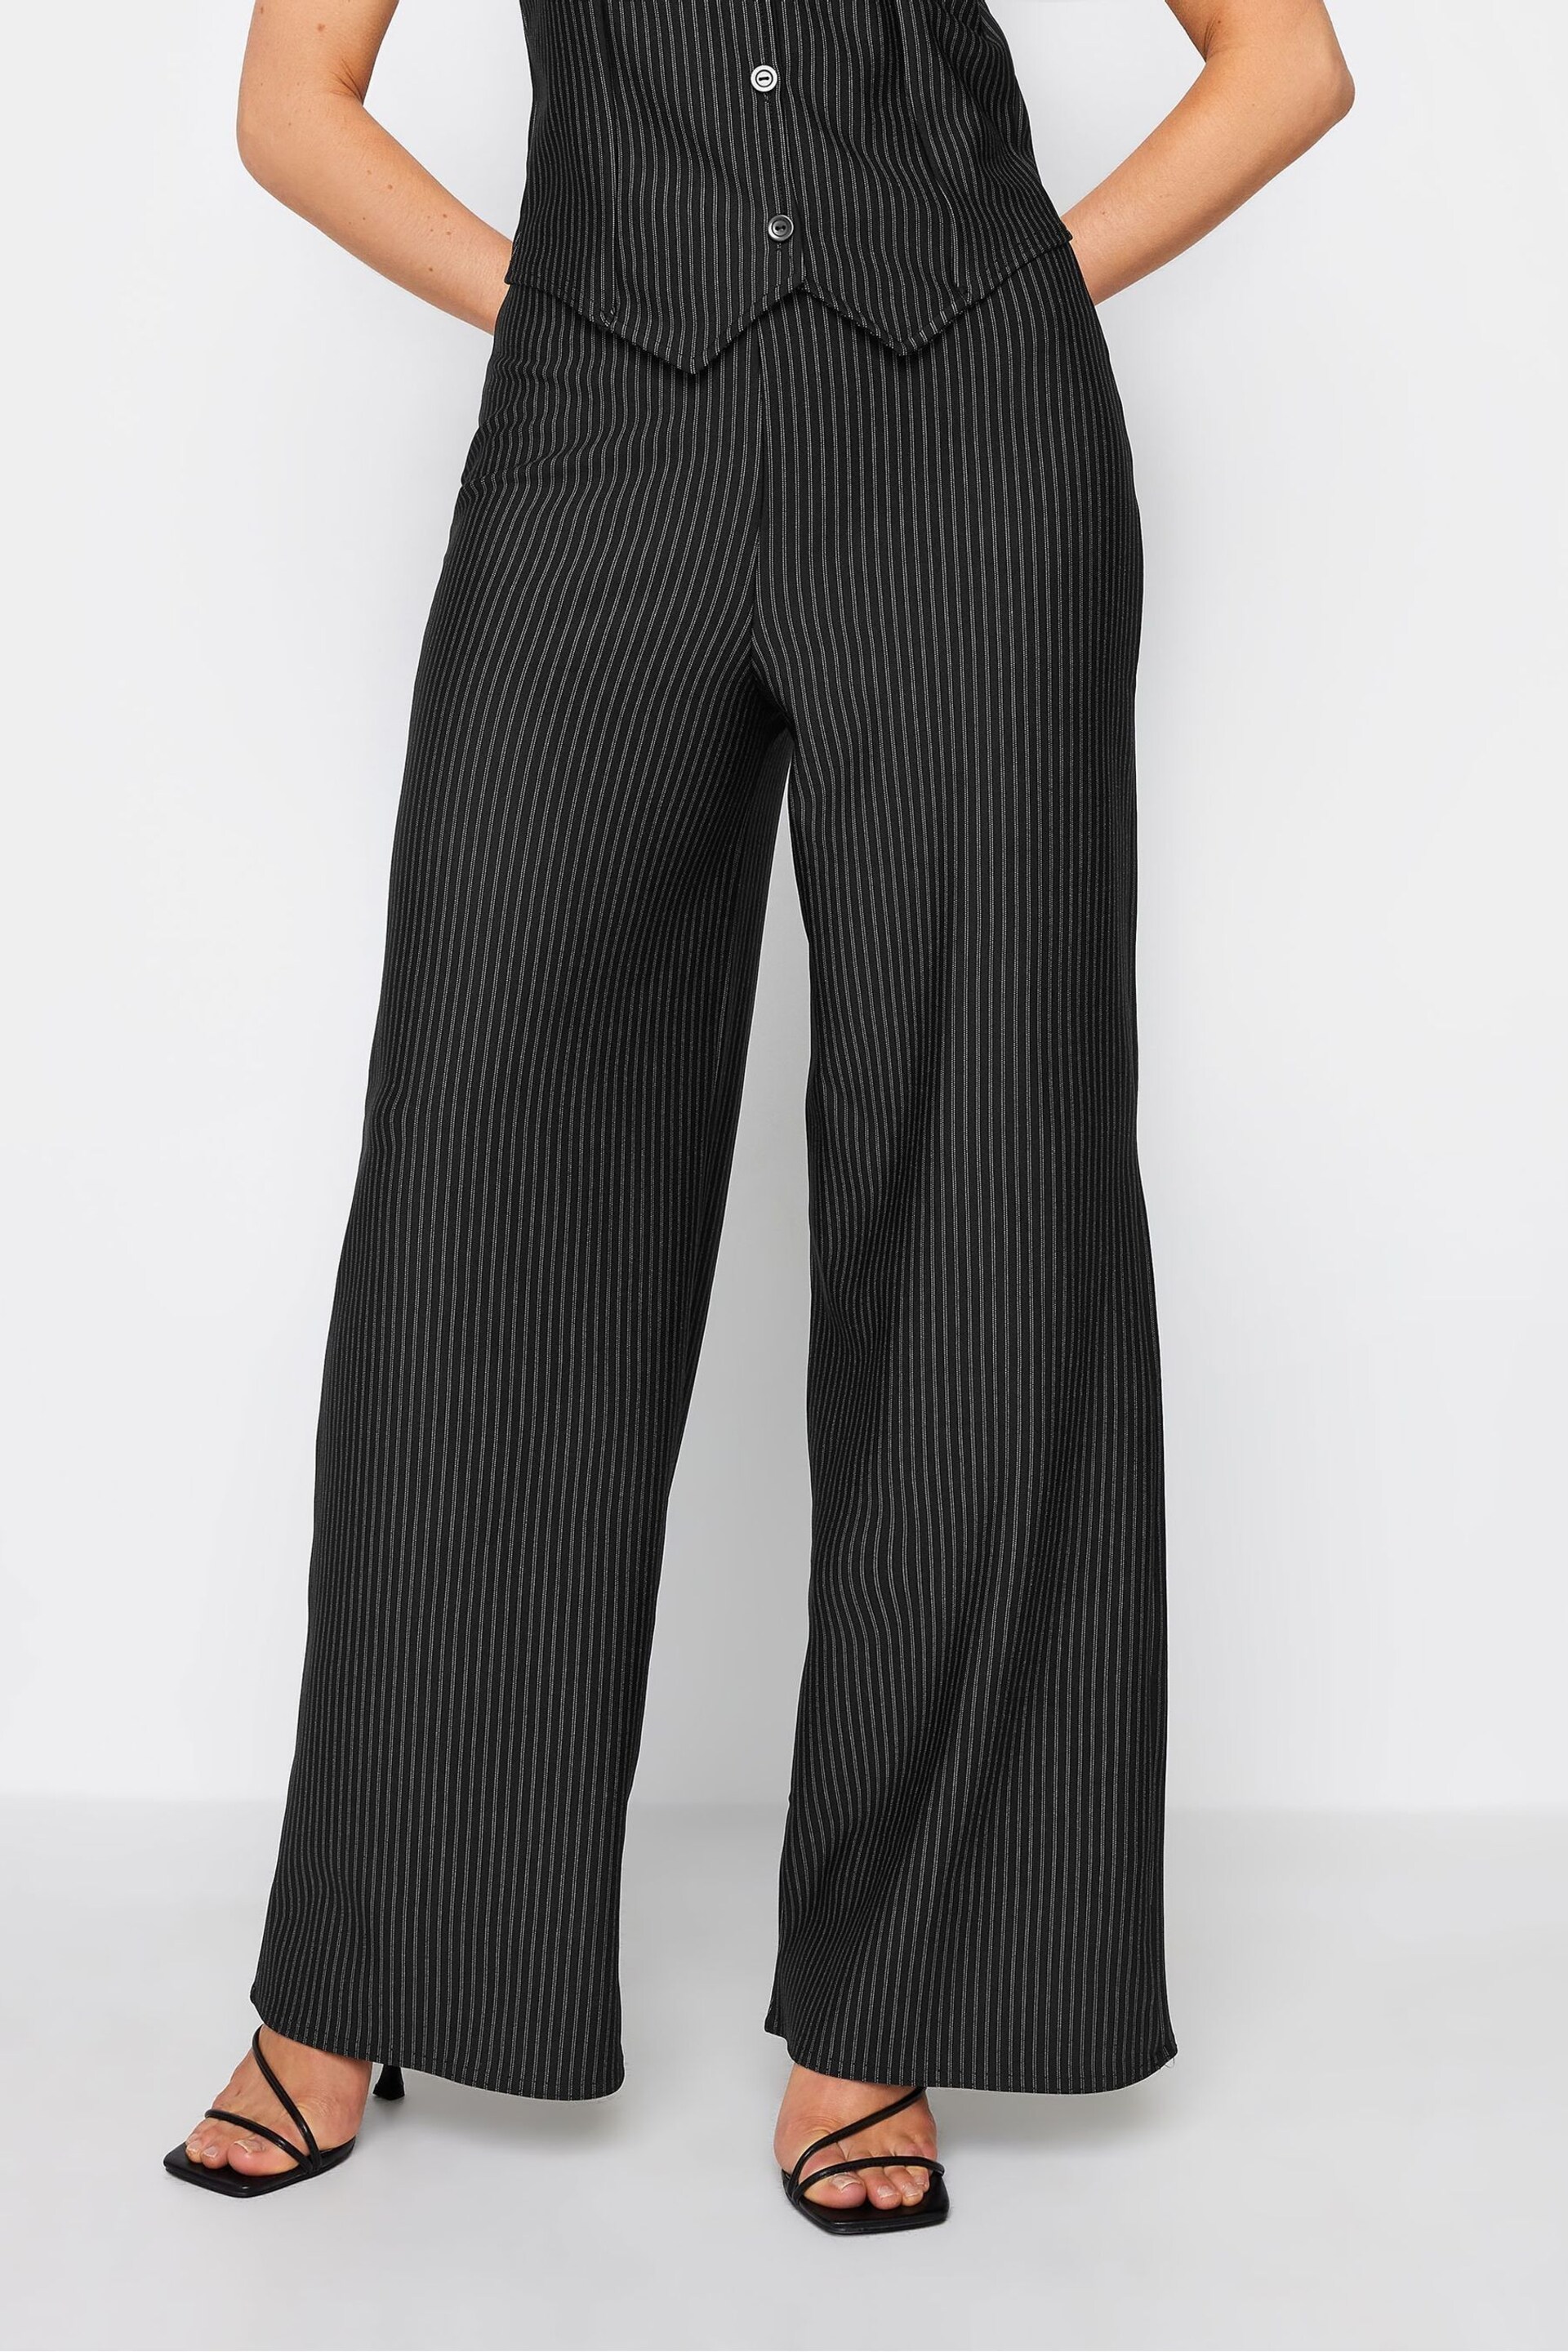 Long Tall Sally Black Pinstripe Wide Leg Trousers - Image 2 of 4